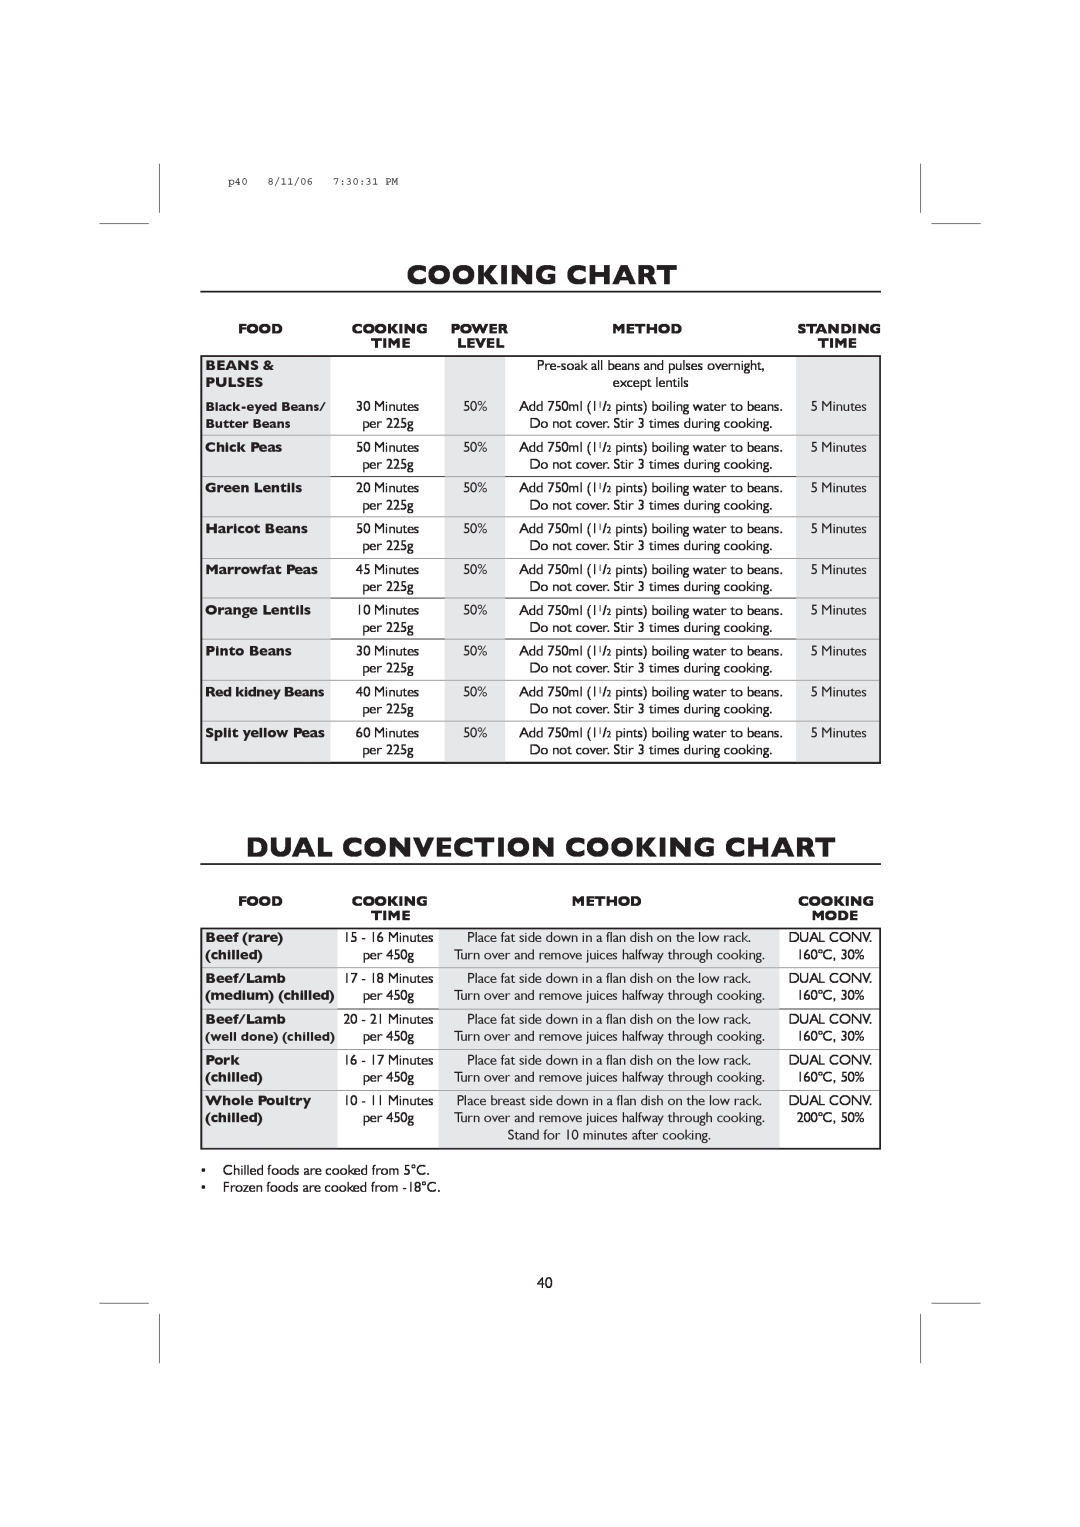 Sharp R-98STM-A, R-959M operation manual Dual Convection Cooking Chart, p40 8/11/06 73031 PM 